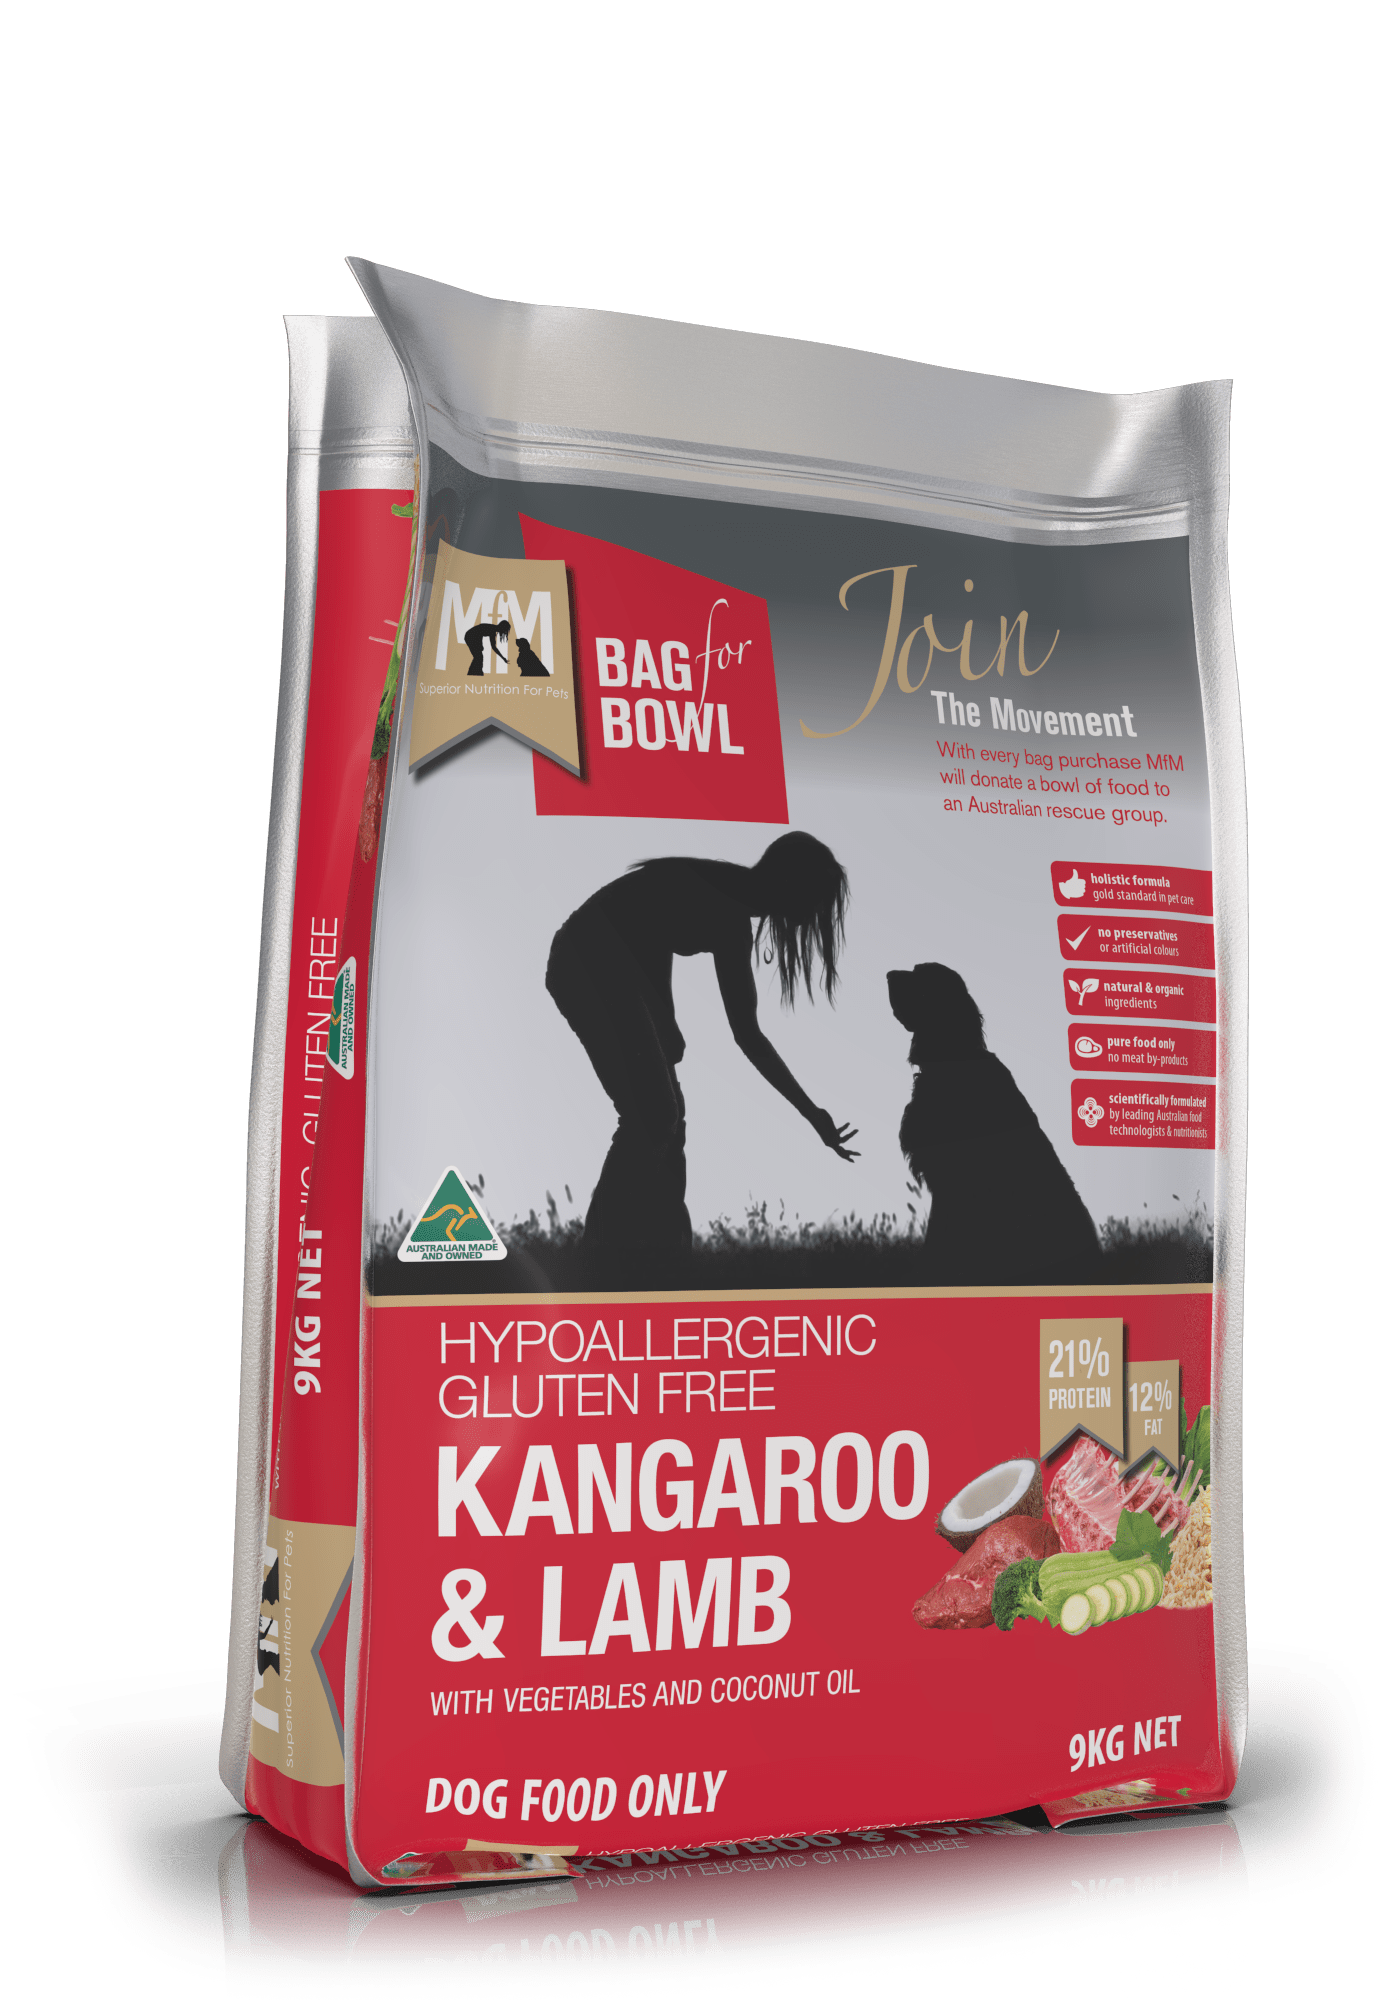 meals for mutts dog food review